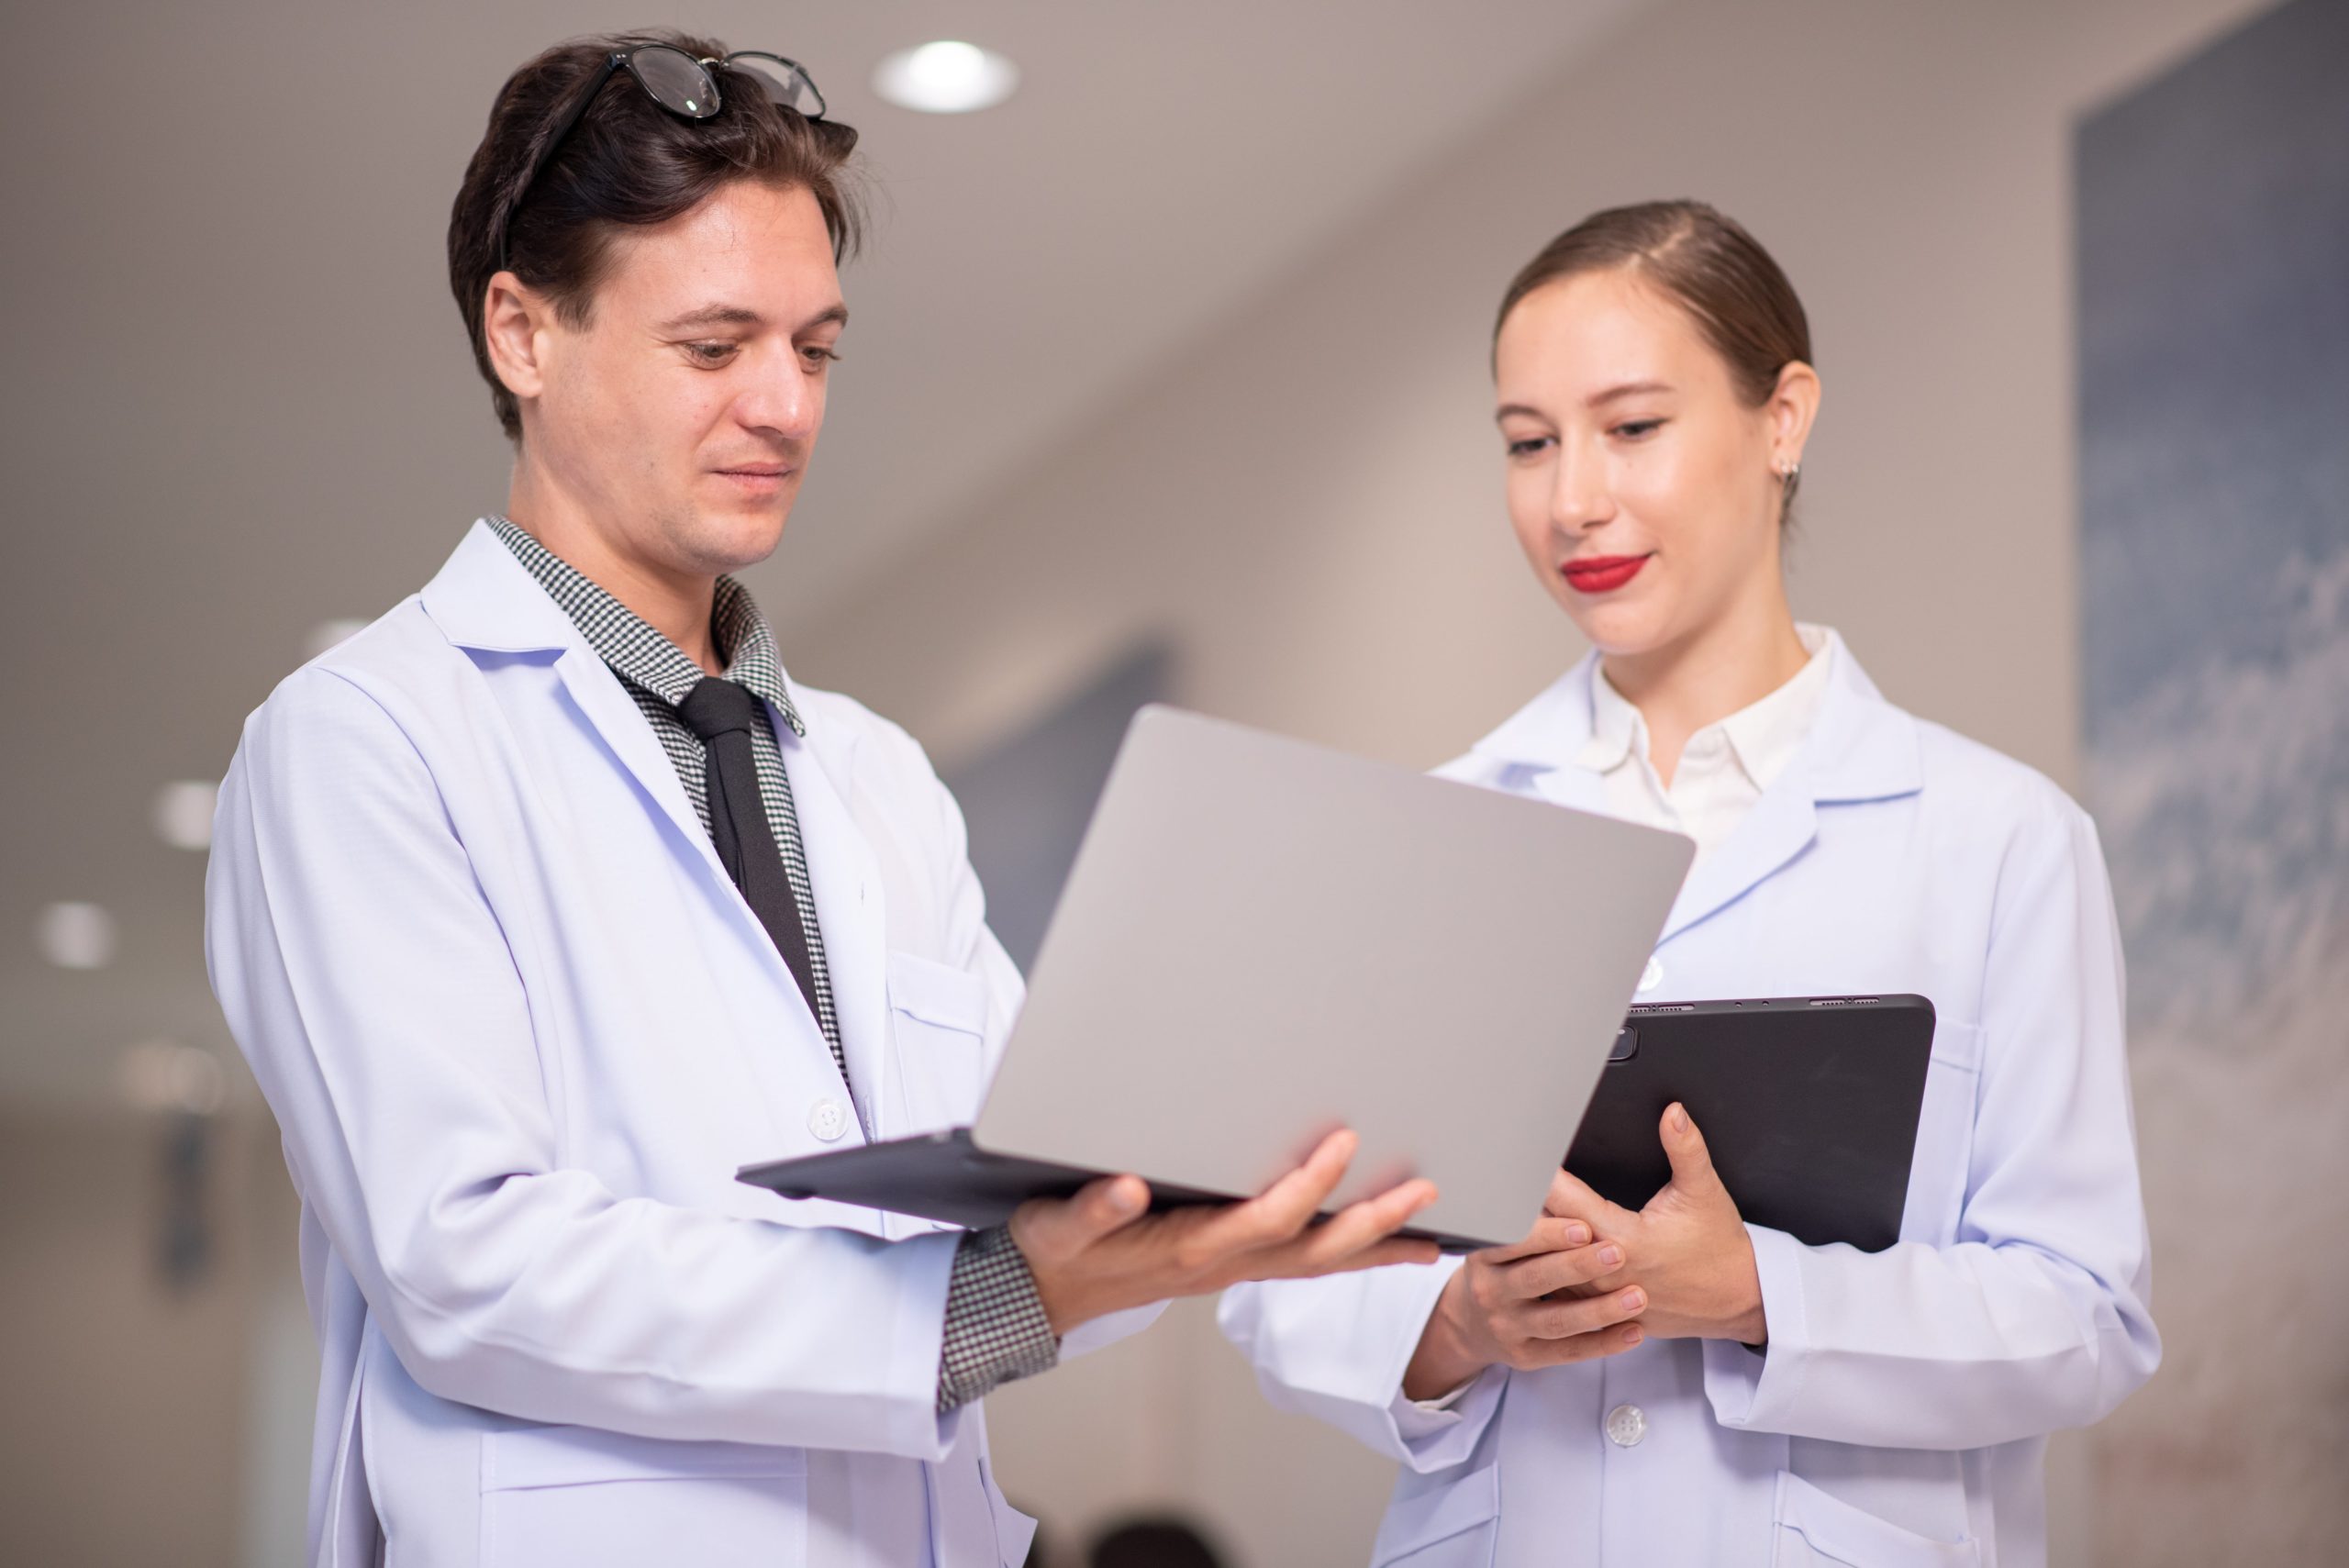 a man and woman in white coats holding laptops